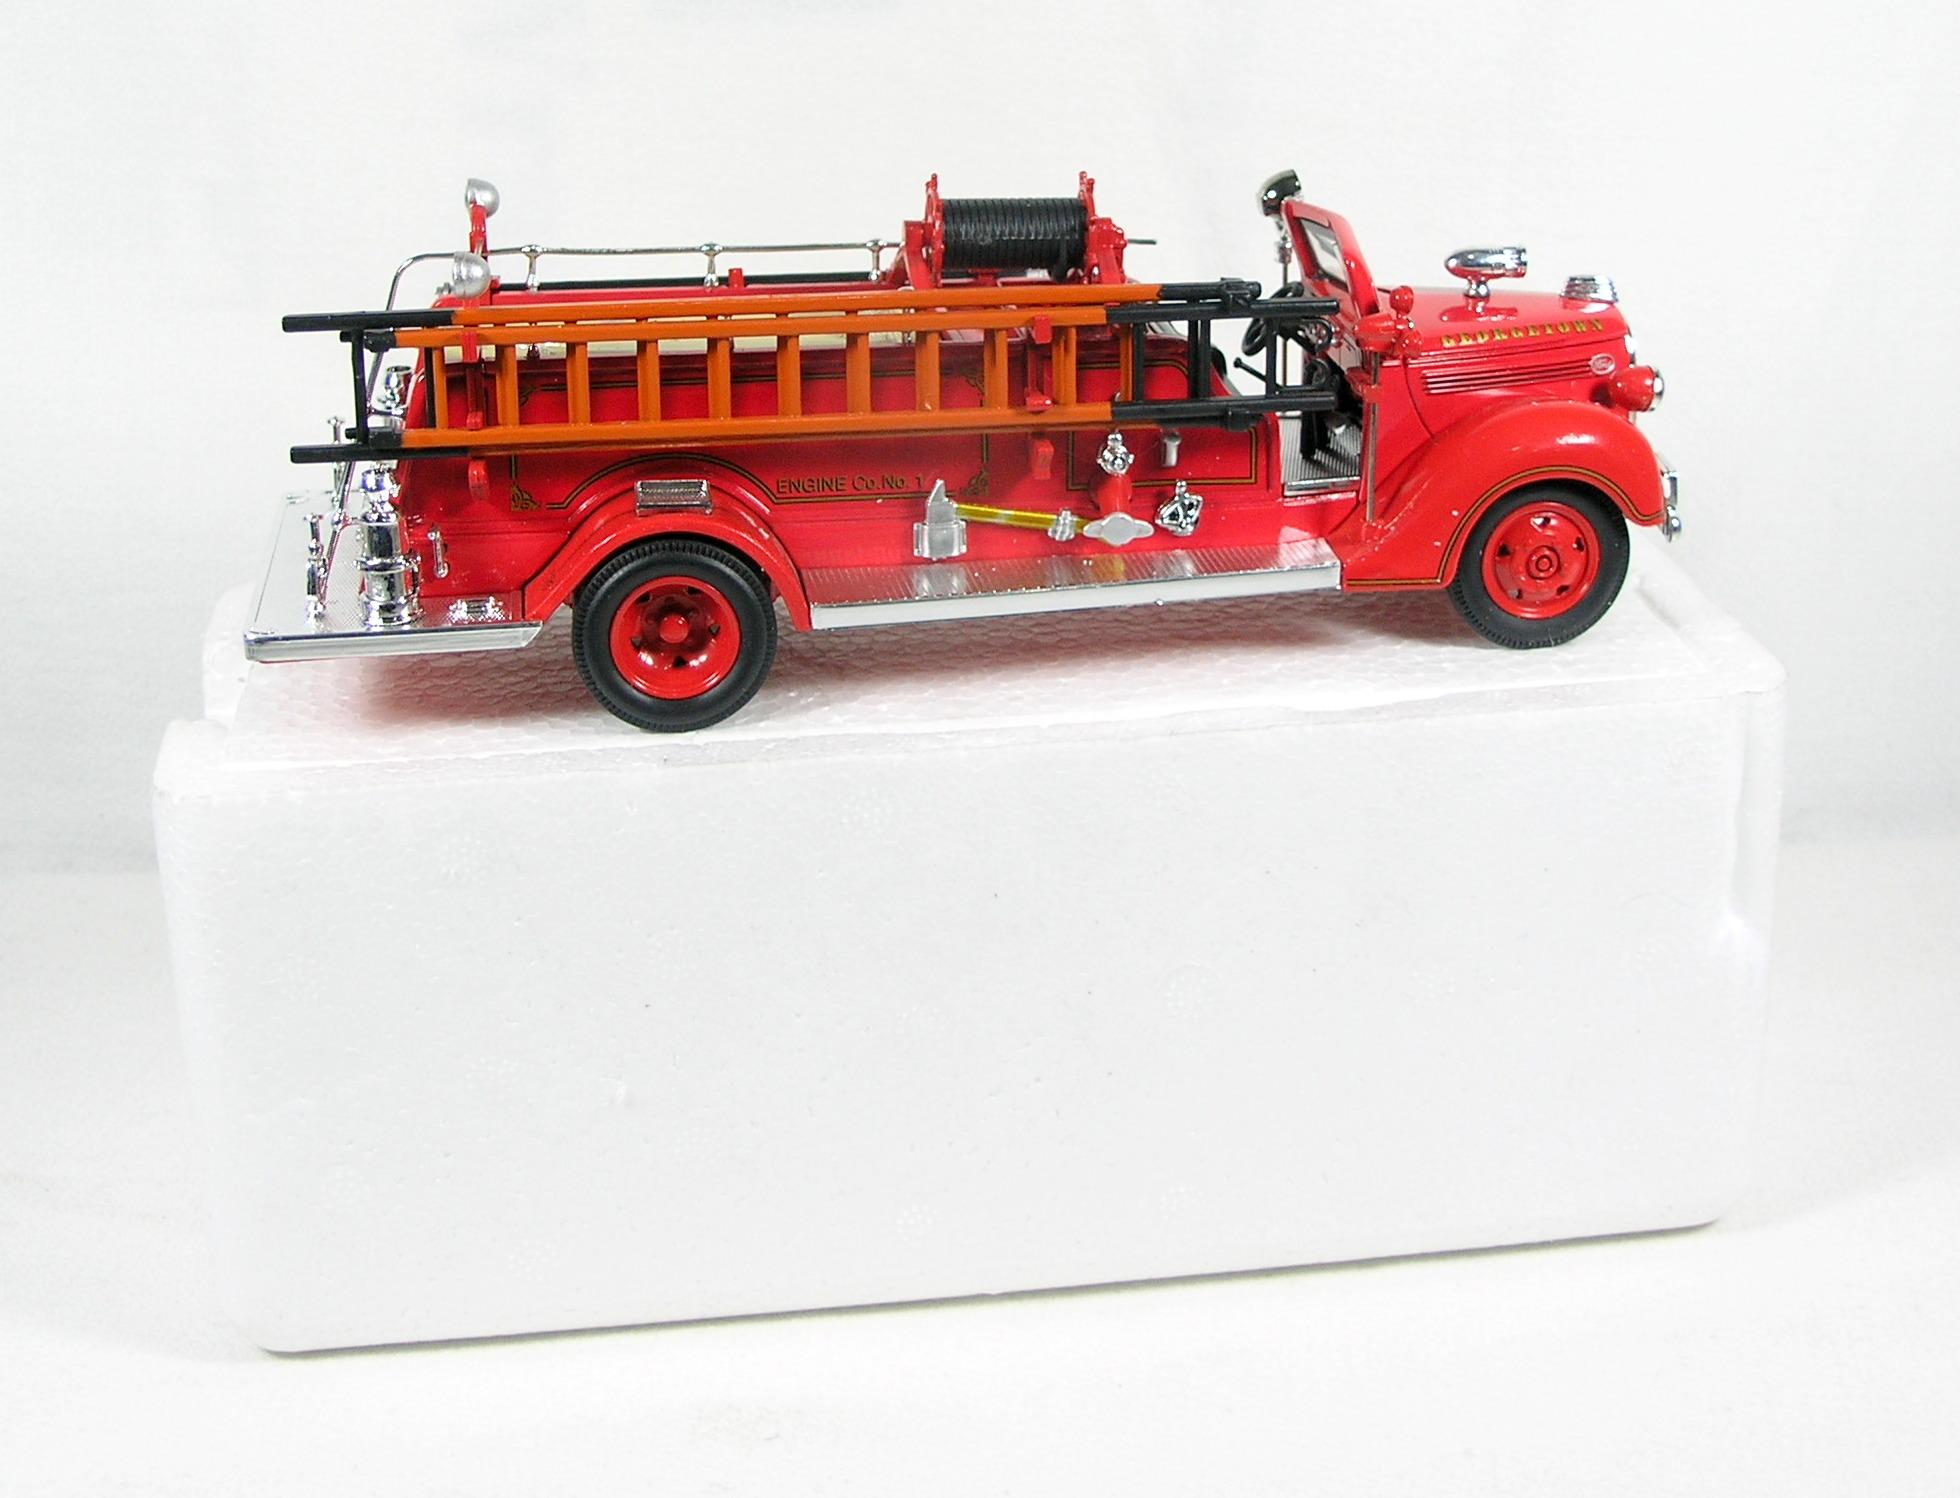 Diecast Replica of 1938 Ford Fire Engine from Signature Models for National